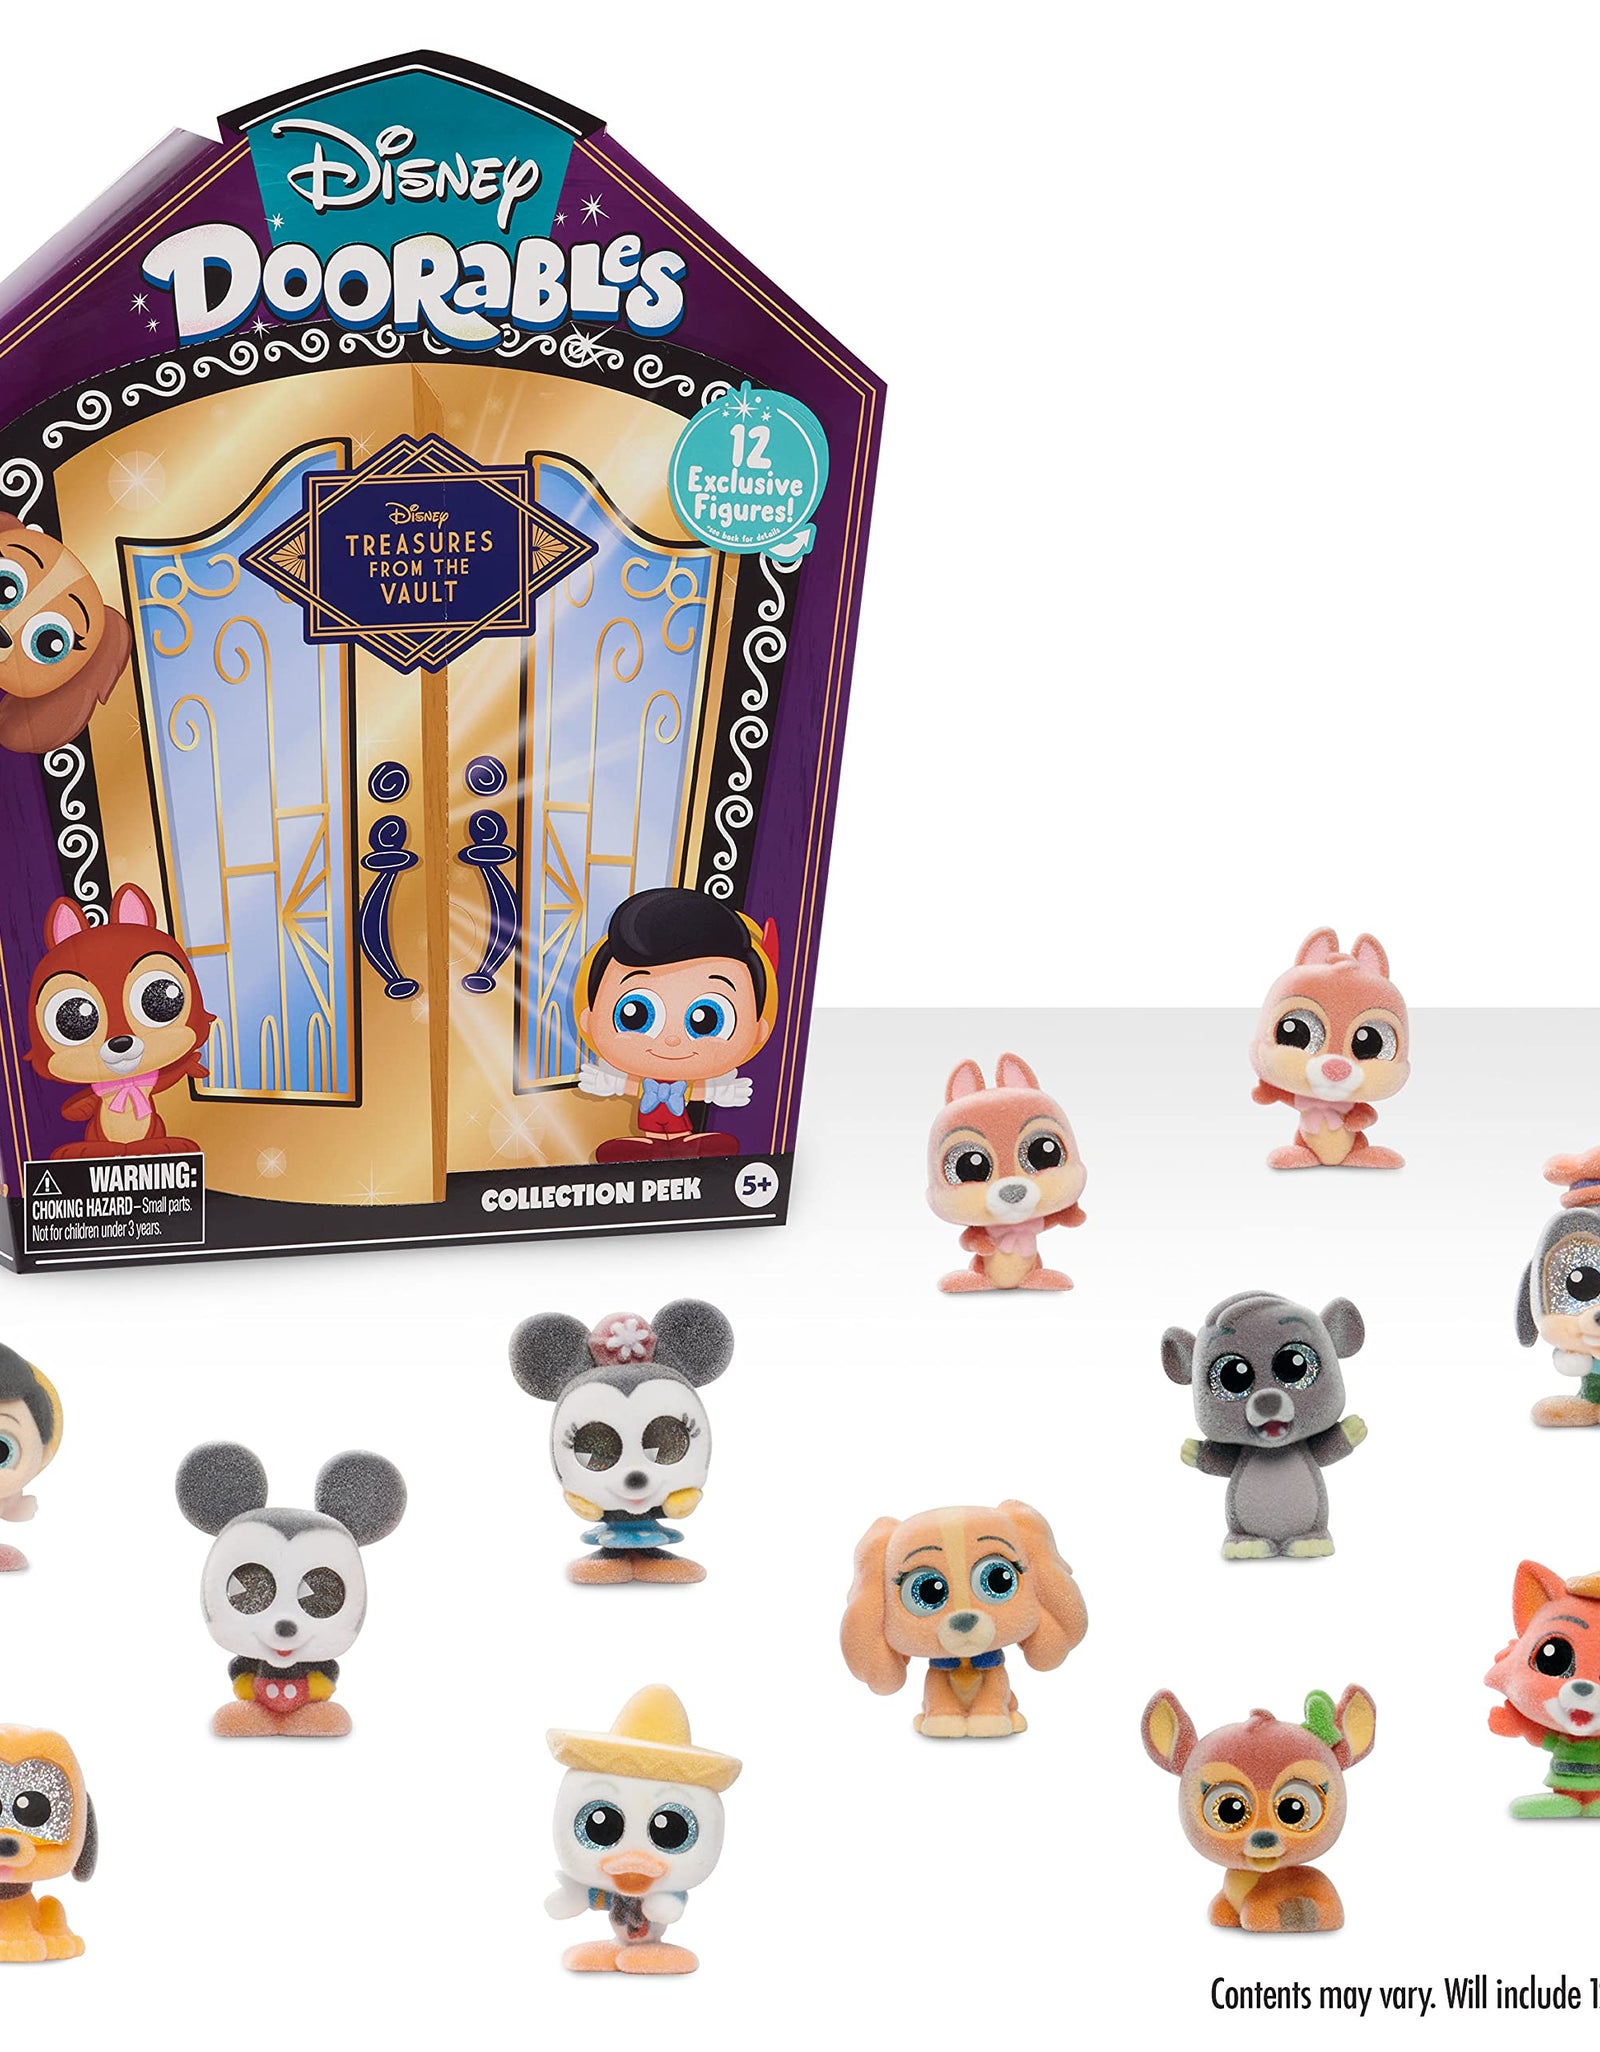 Disney Doorables Treasures from The Vault Collection Peek, Includes 12 Exclusive Mini Figures, Styles May Vary, Amazon Exclusive, by Just Play